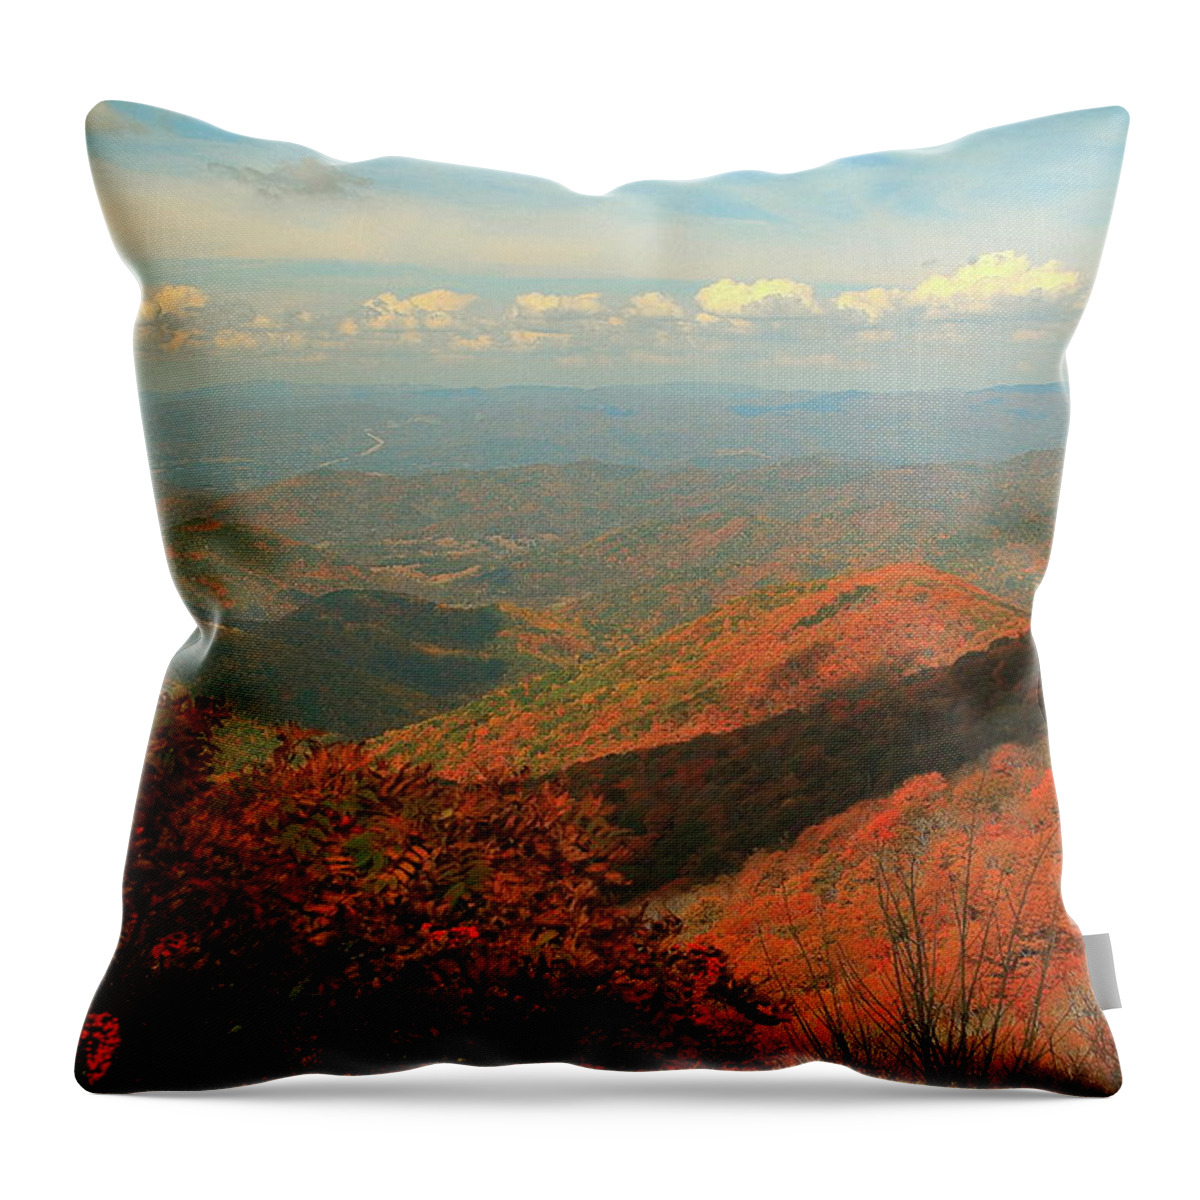 Blue Ridge Parkway Views Throw Pillow featuring the photograph I Could See Forever by Allen Nice-Webb